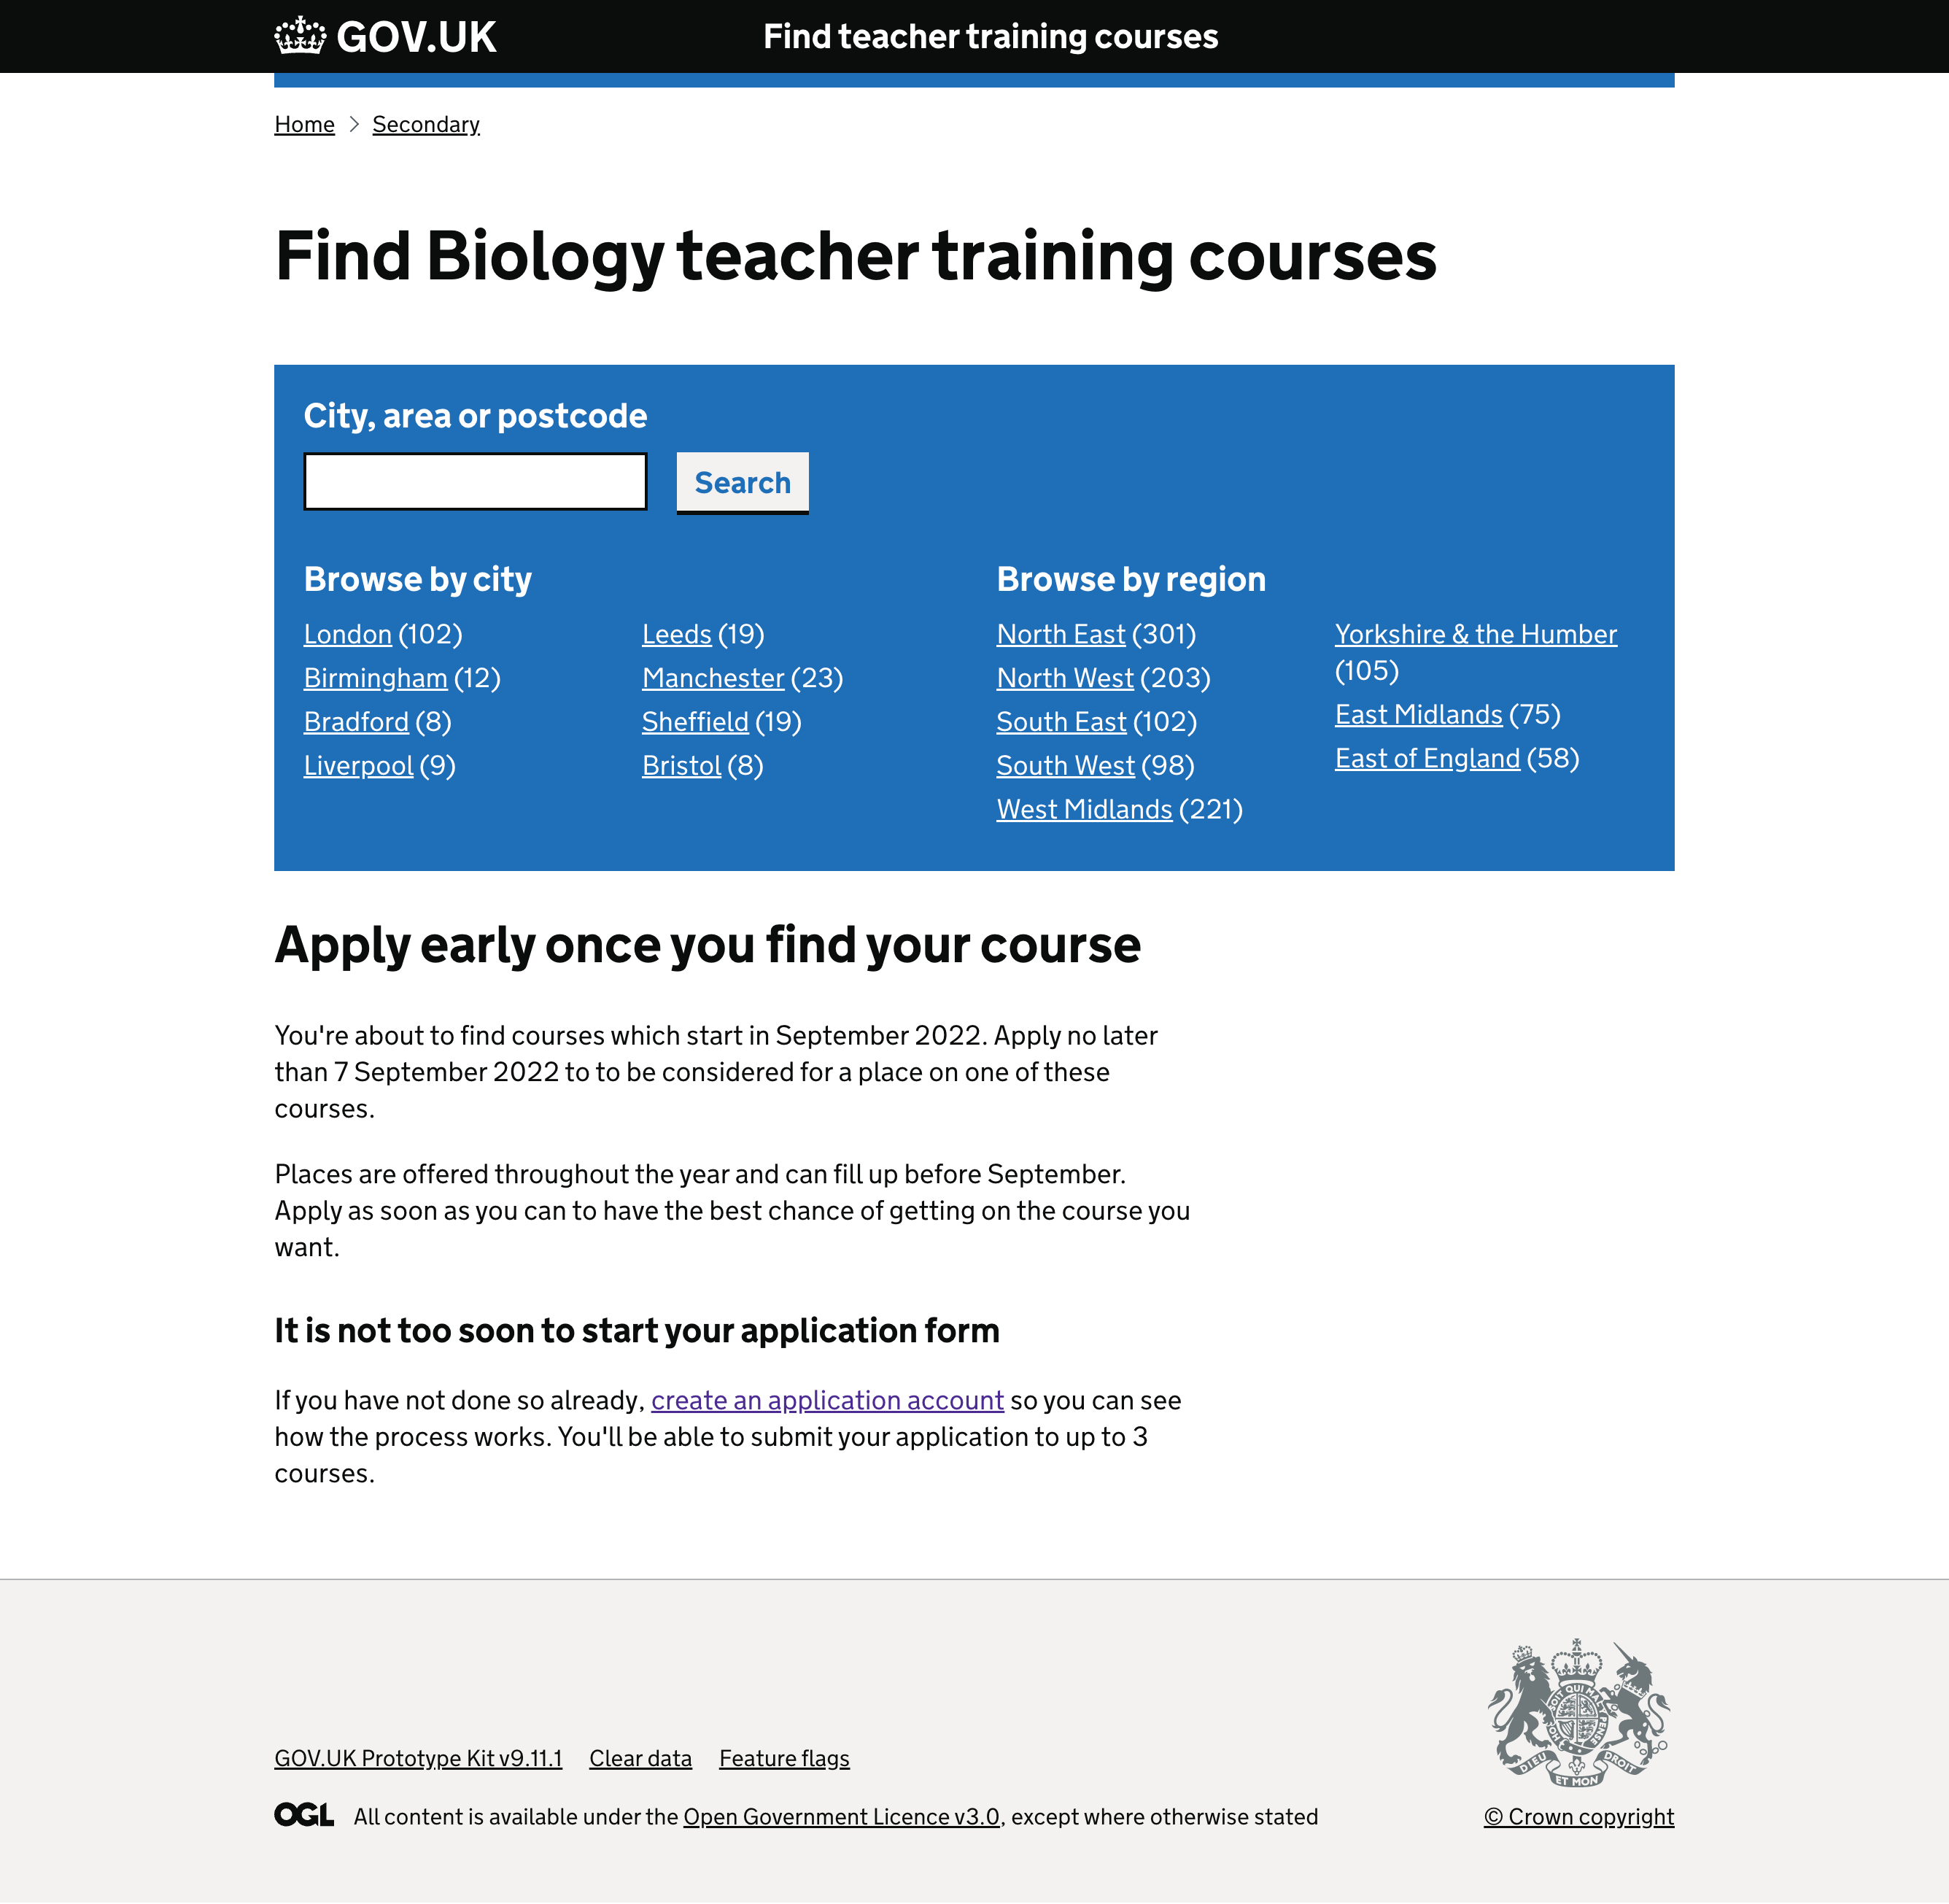 Screenshot showing page titled 'Find Biology teacher training courses'